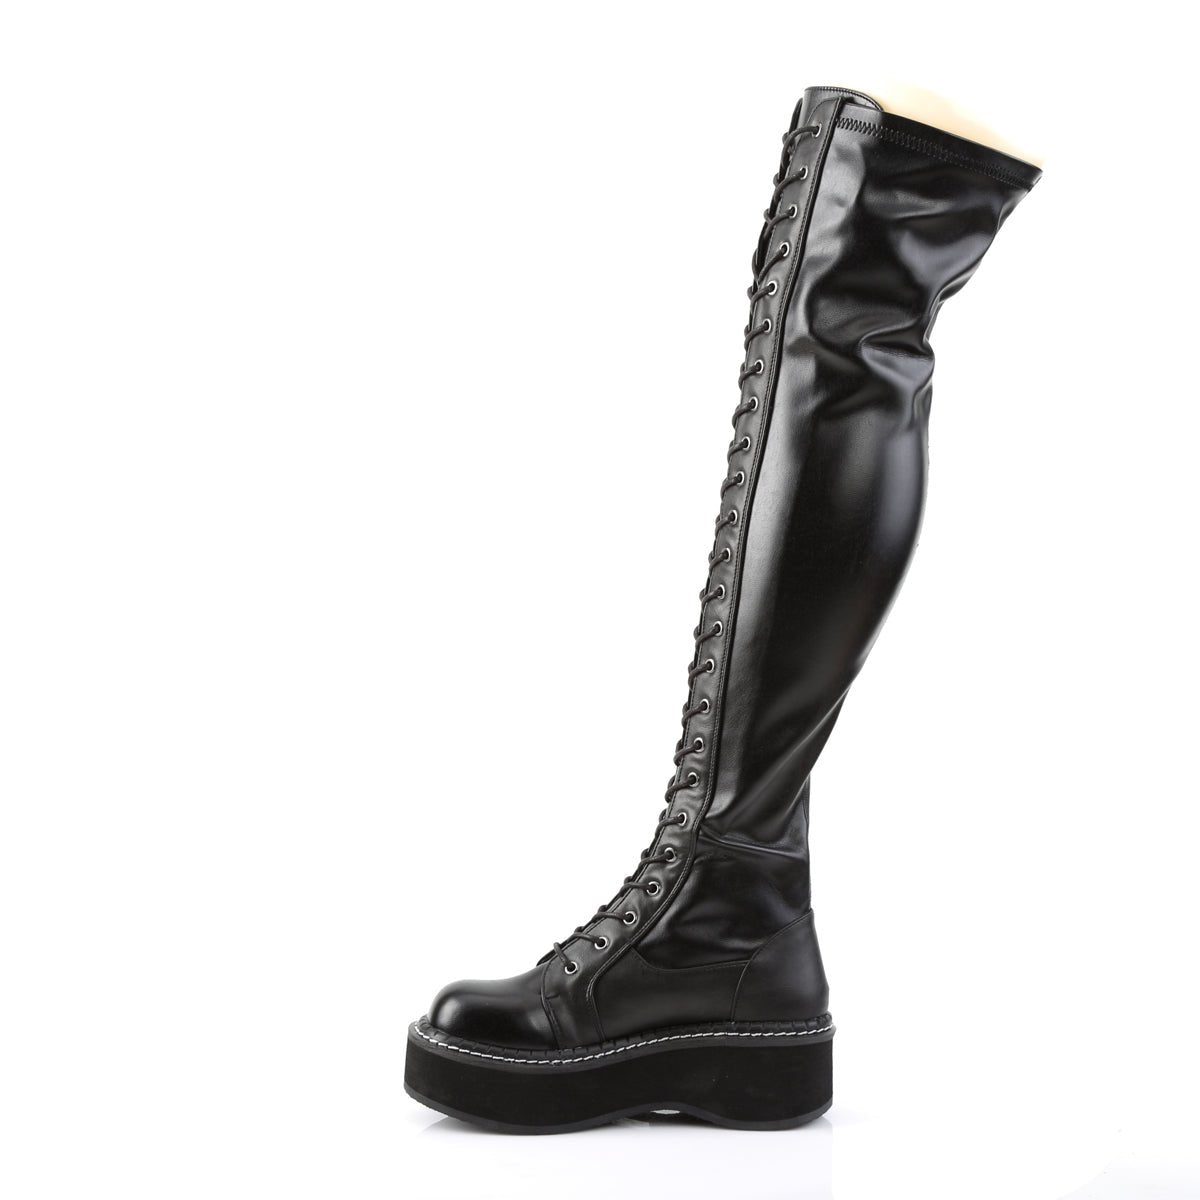 Too Fast | Demonia Emily 375 | Black Stretch Vegan Leather Women's Over The Knee Boots